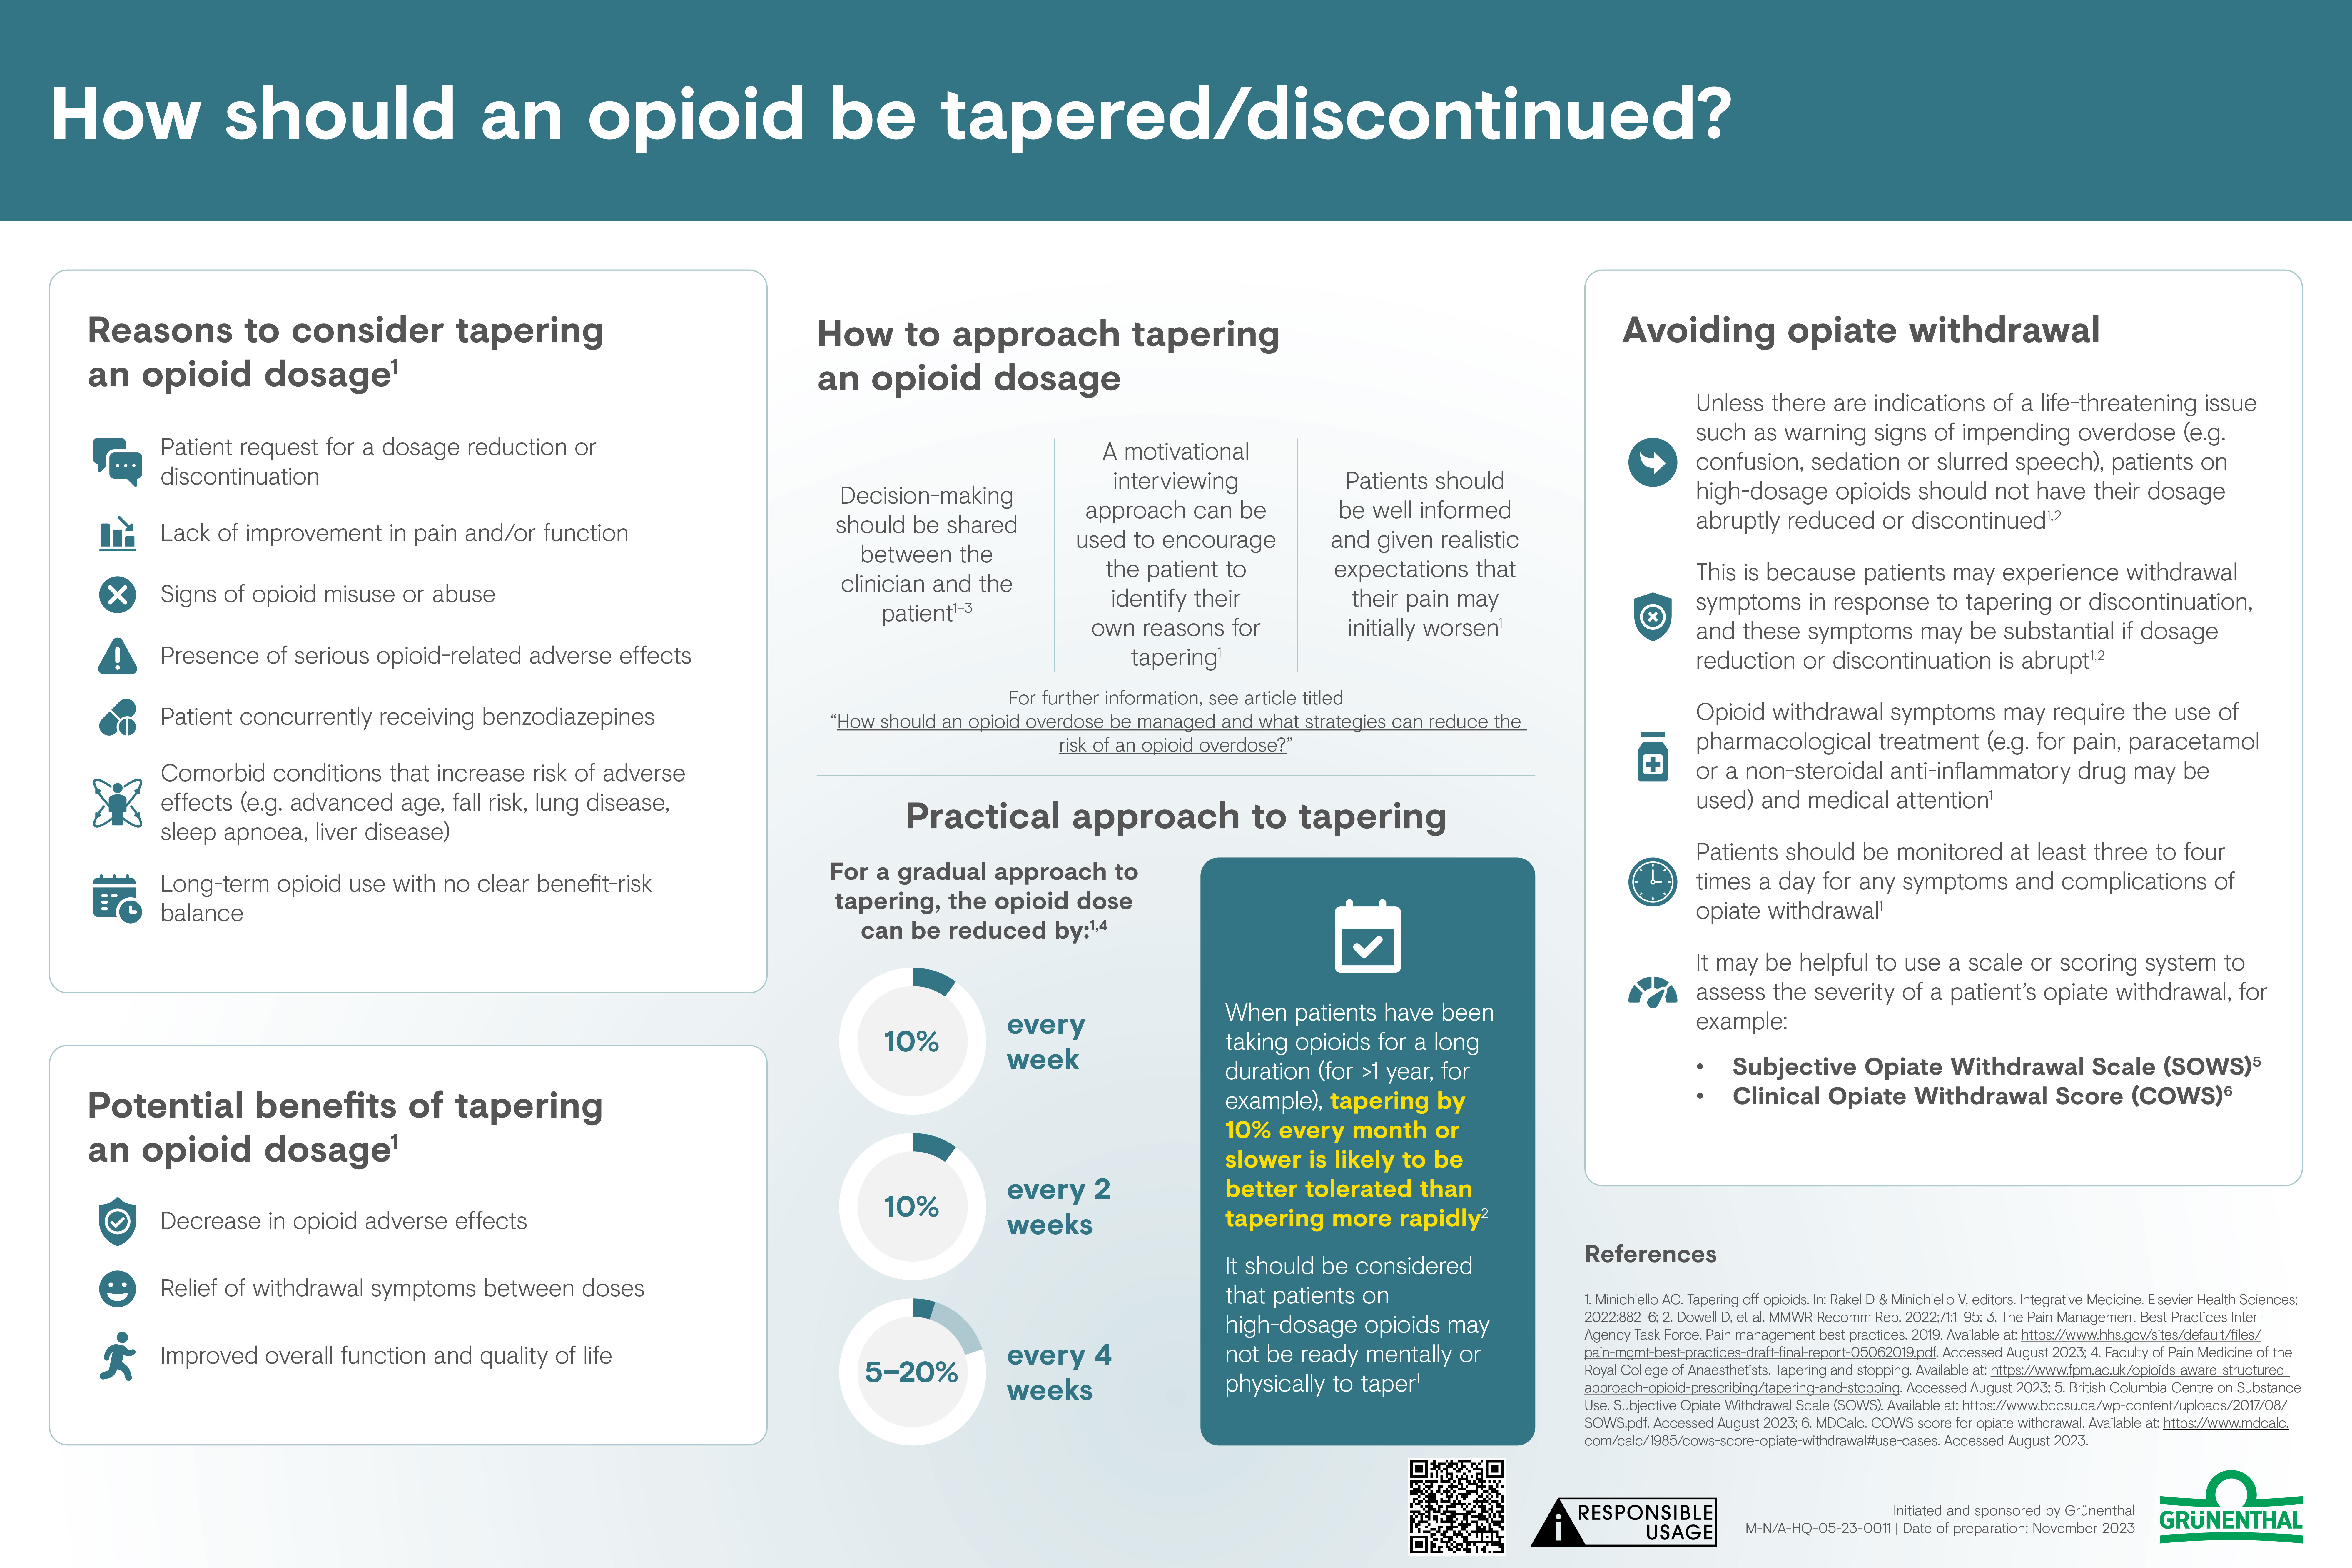 How should an opioid be tapered